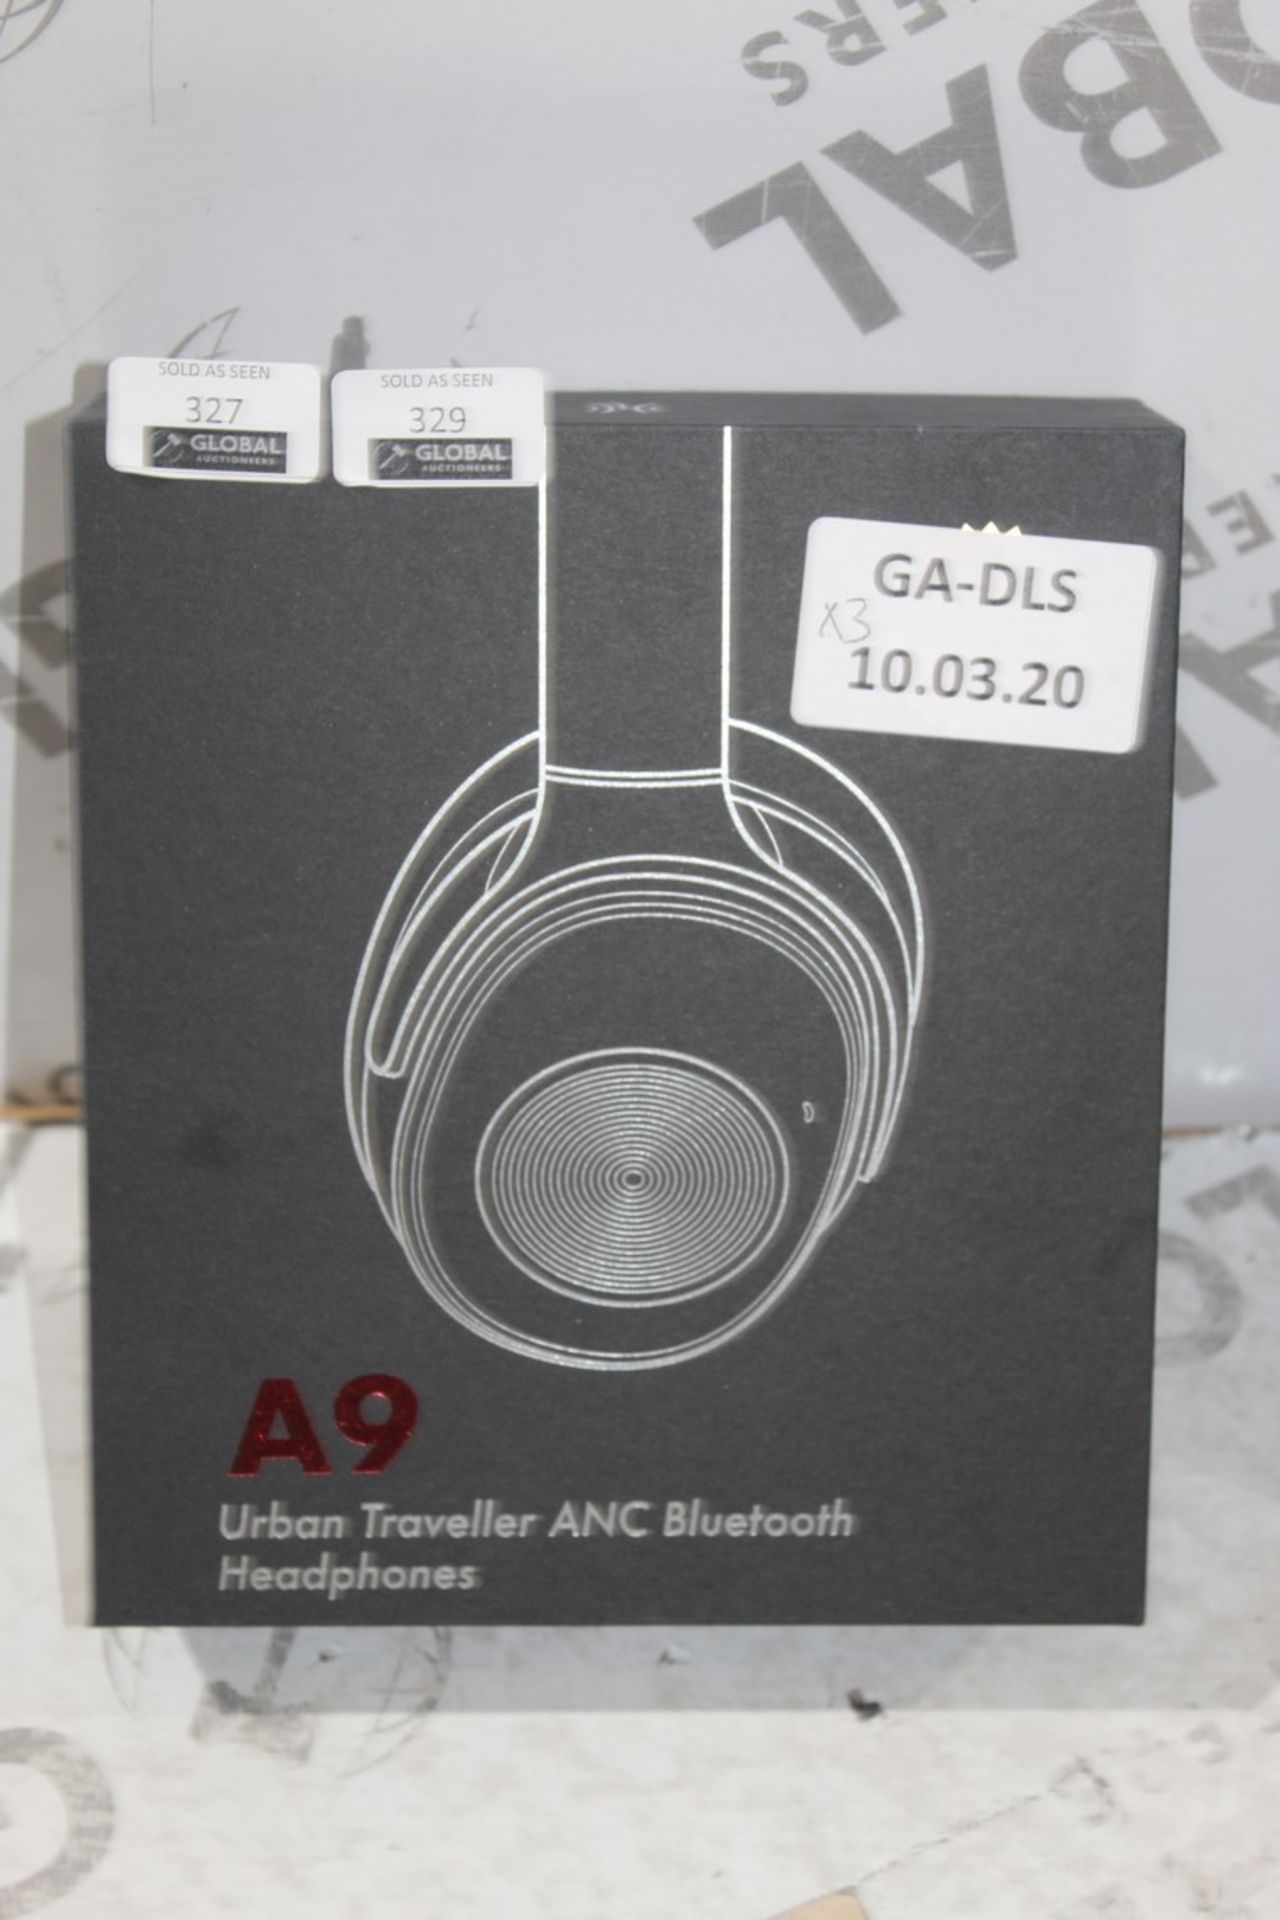 Boxed Brand New Sealed One Audio A9 Urban Traveller ANC Bluetooth Headphones RR £60 (Appraisals